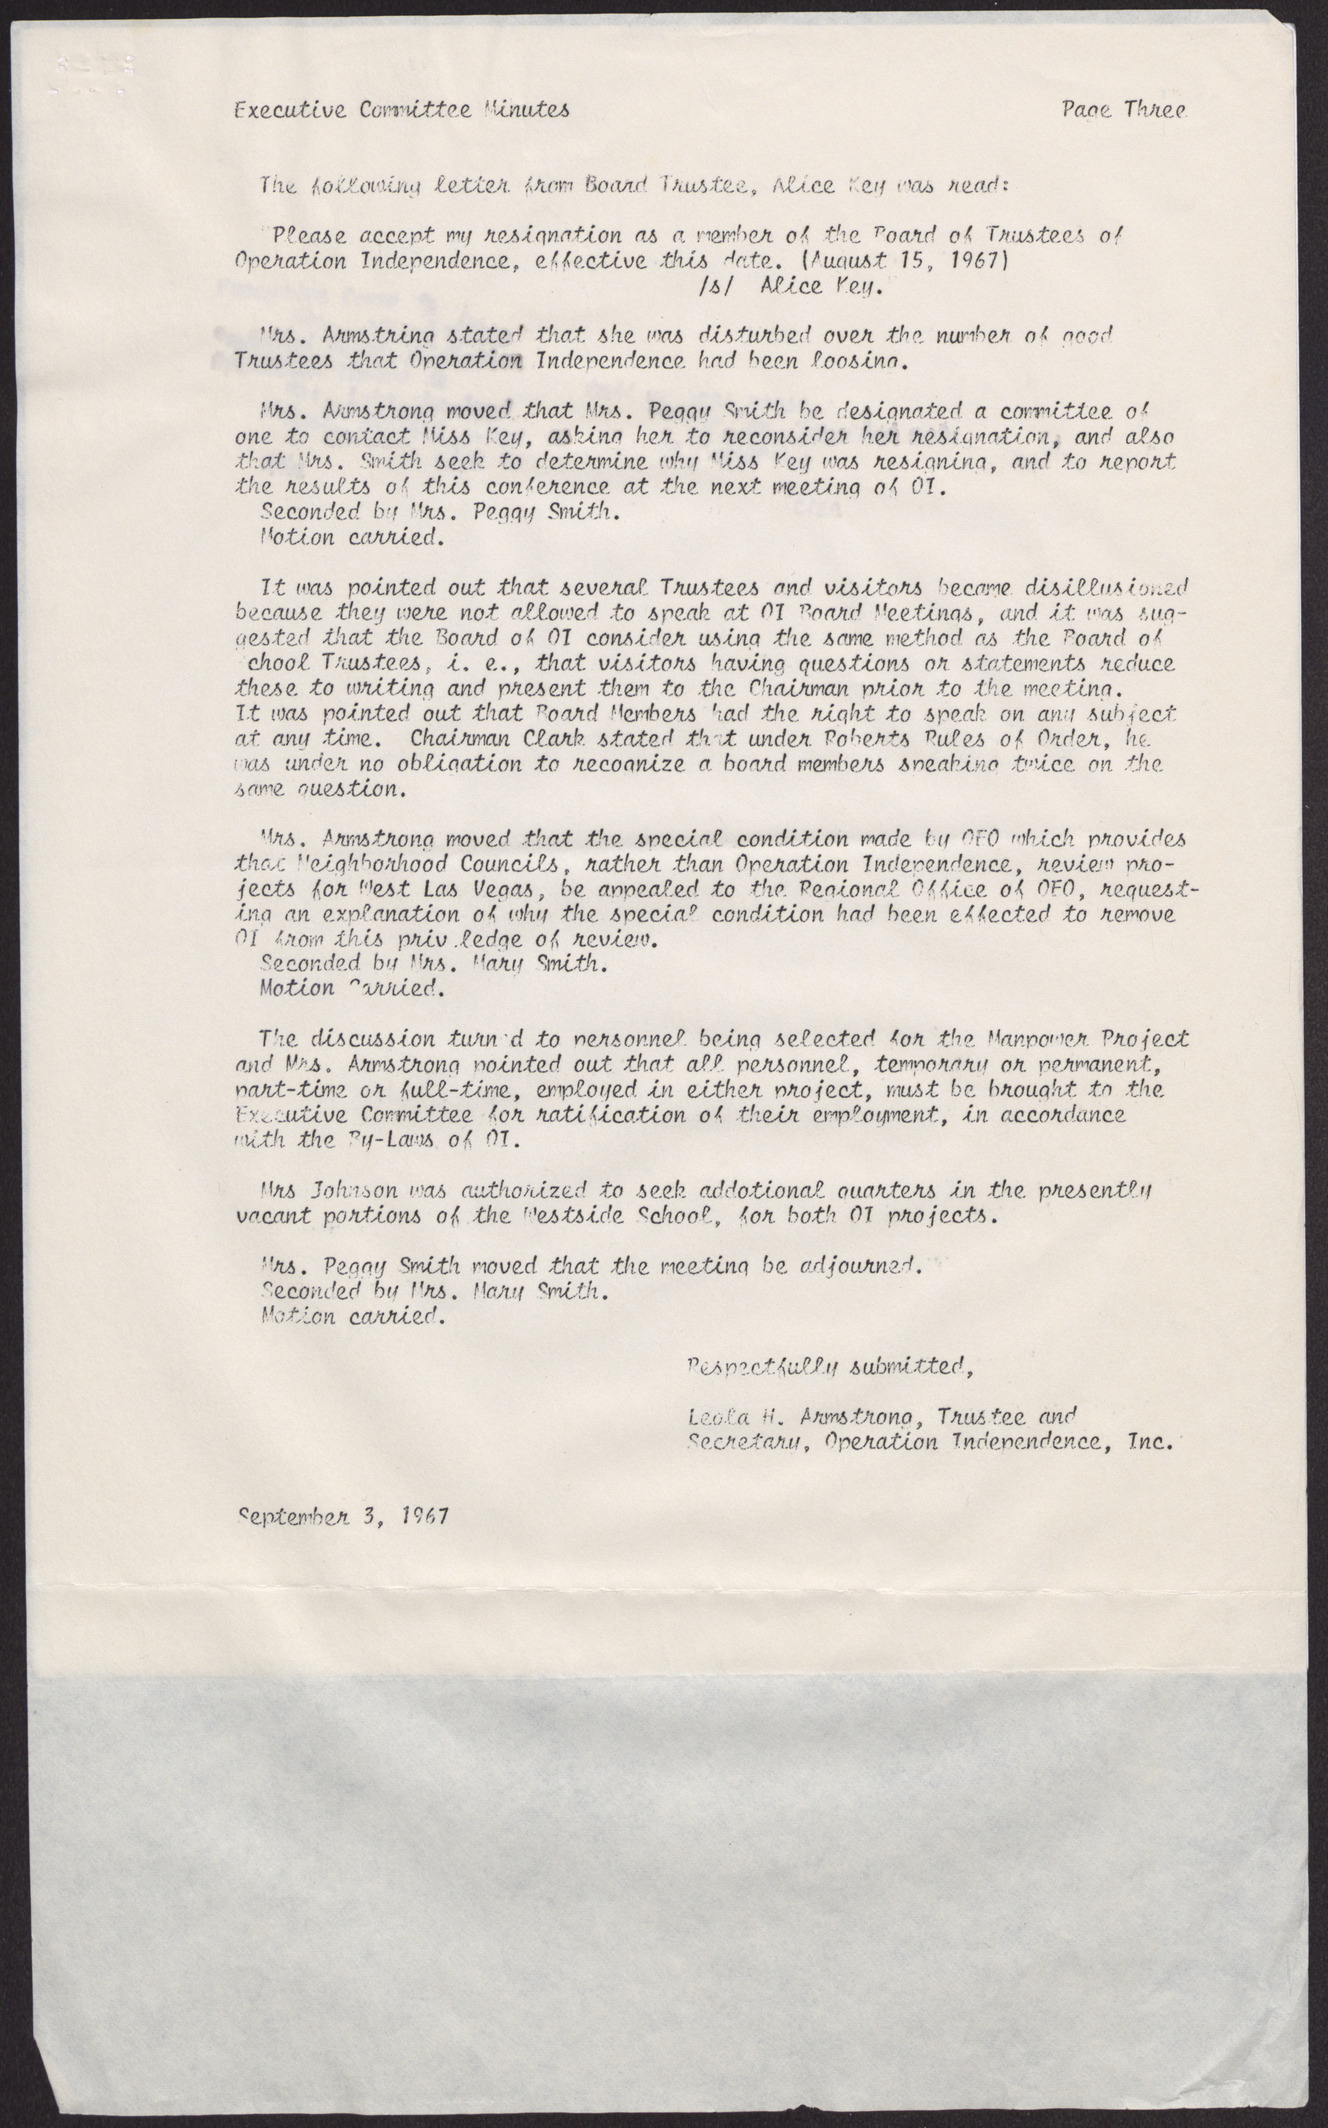 Minutes from an Operation Independence, Inc. Executive Committee Meeting (4 pages), August 16, 1967, page 4